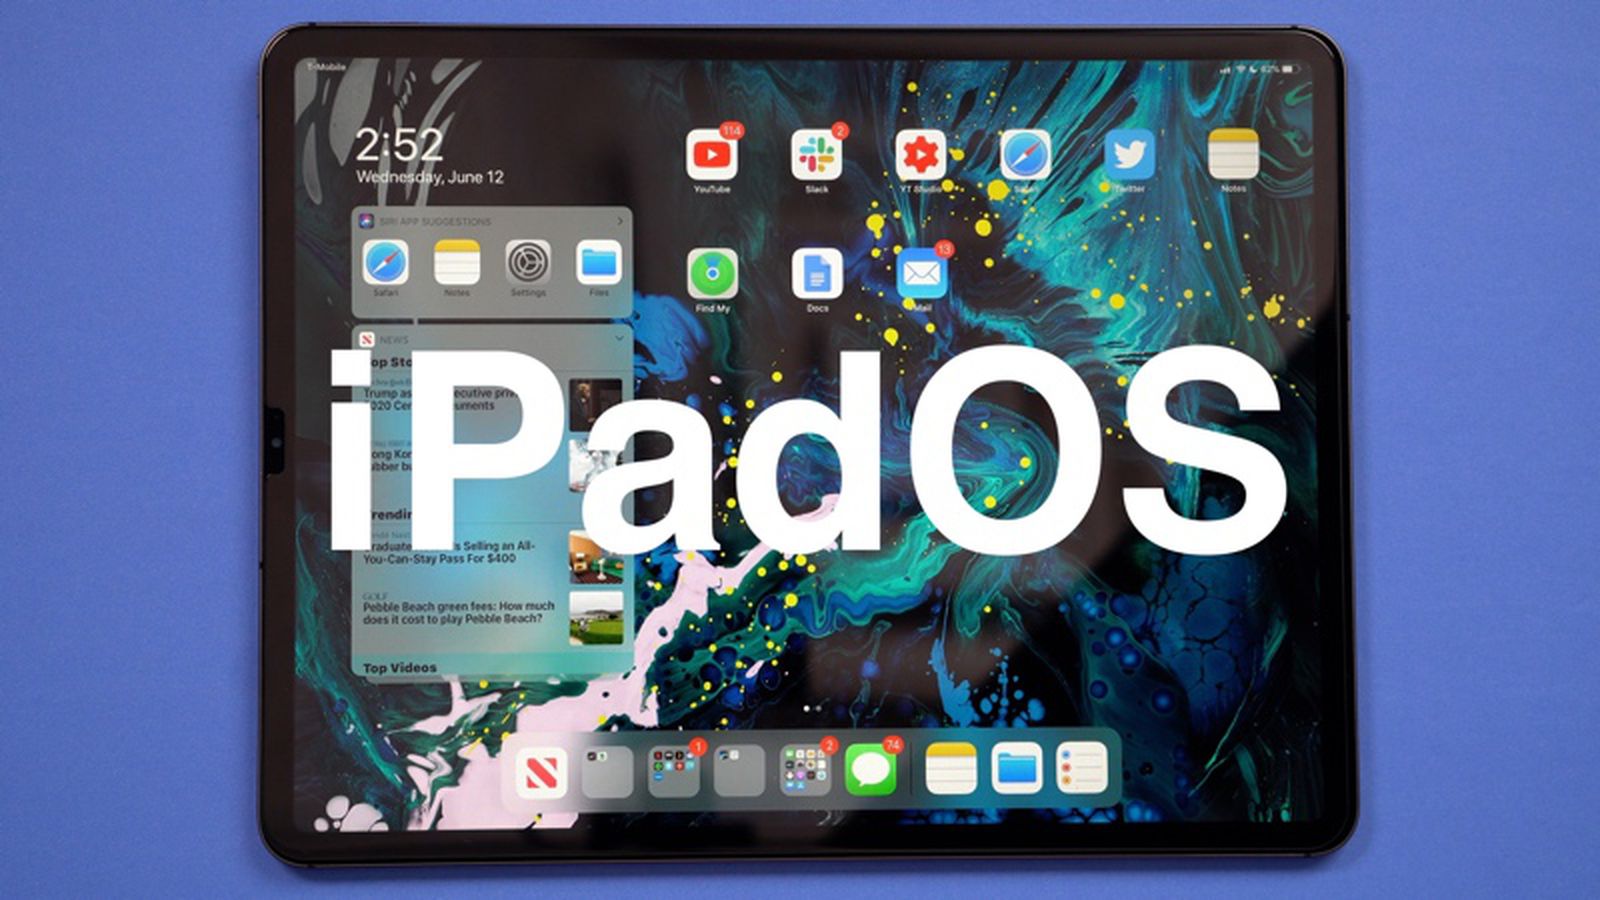 Apple announces iPadOS 15 with homescreen and multitasking improvements